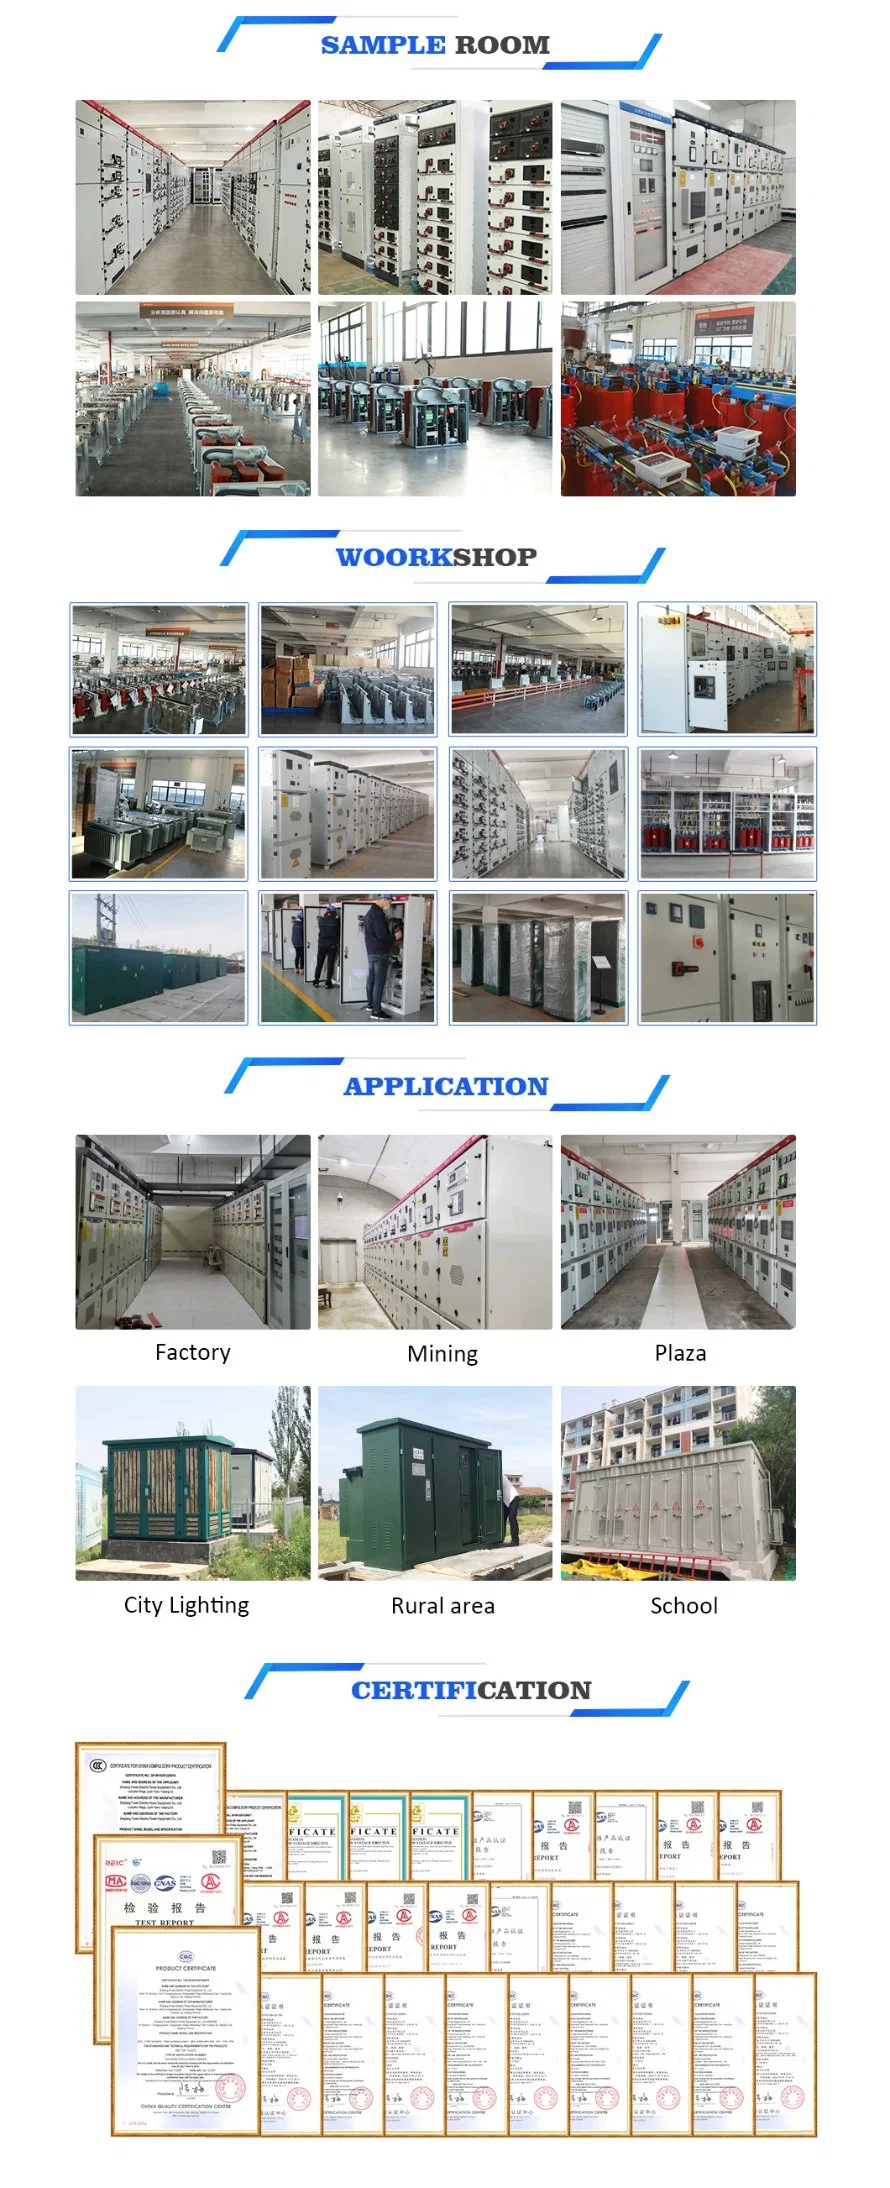 Zhegui Electric Yb Series Electrical Compact Box Type Prefabricated Combined Substation Koisk